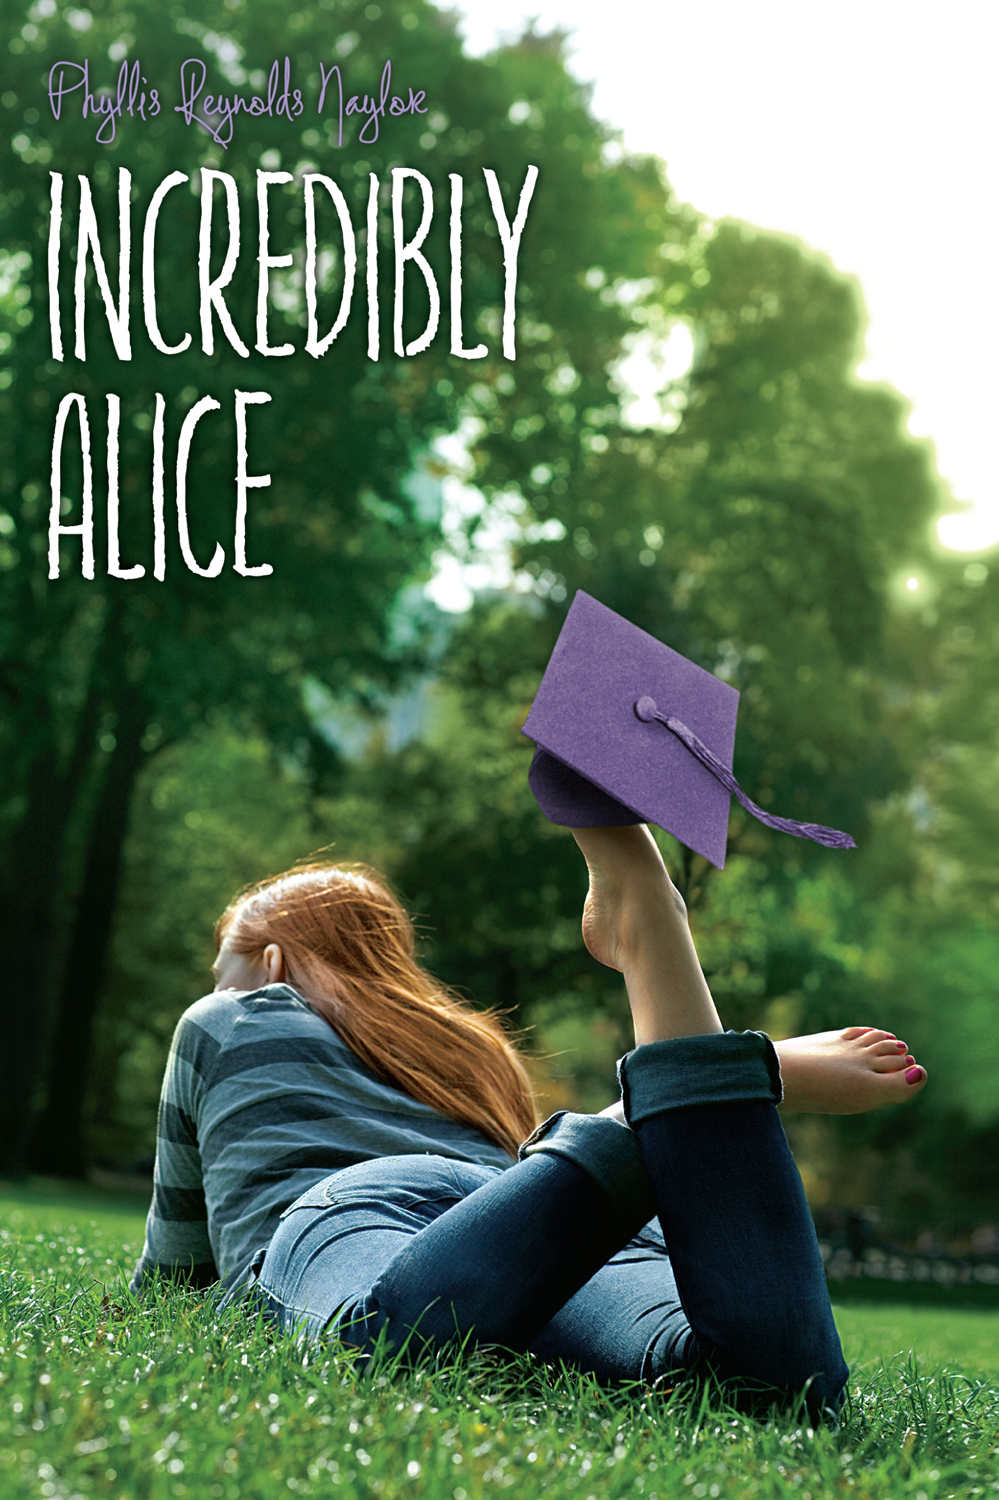 Incredibly Alice by Phyllis Reynolds Naylor